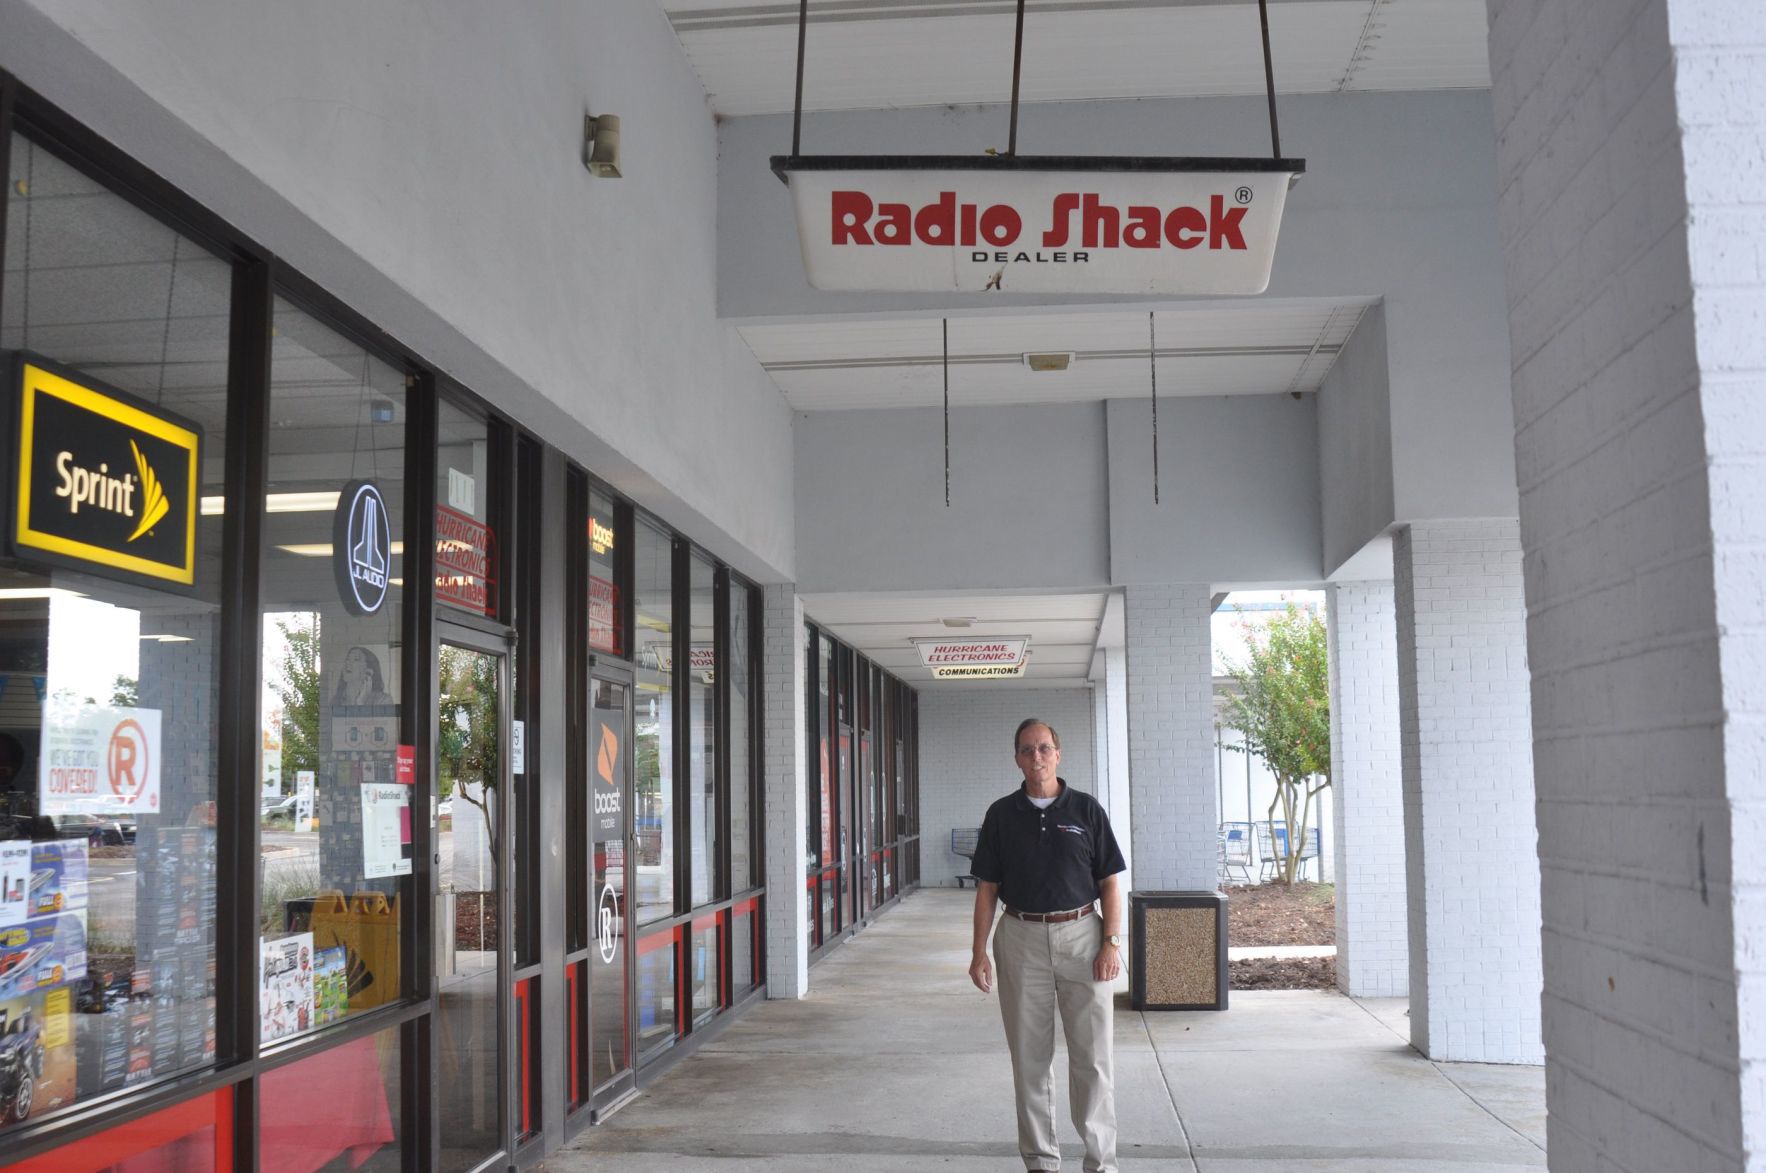 radio shack going out of business commercial